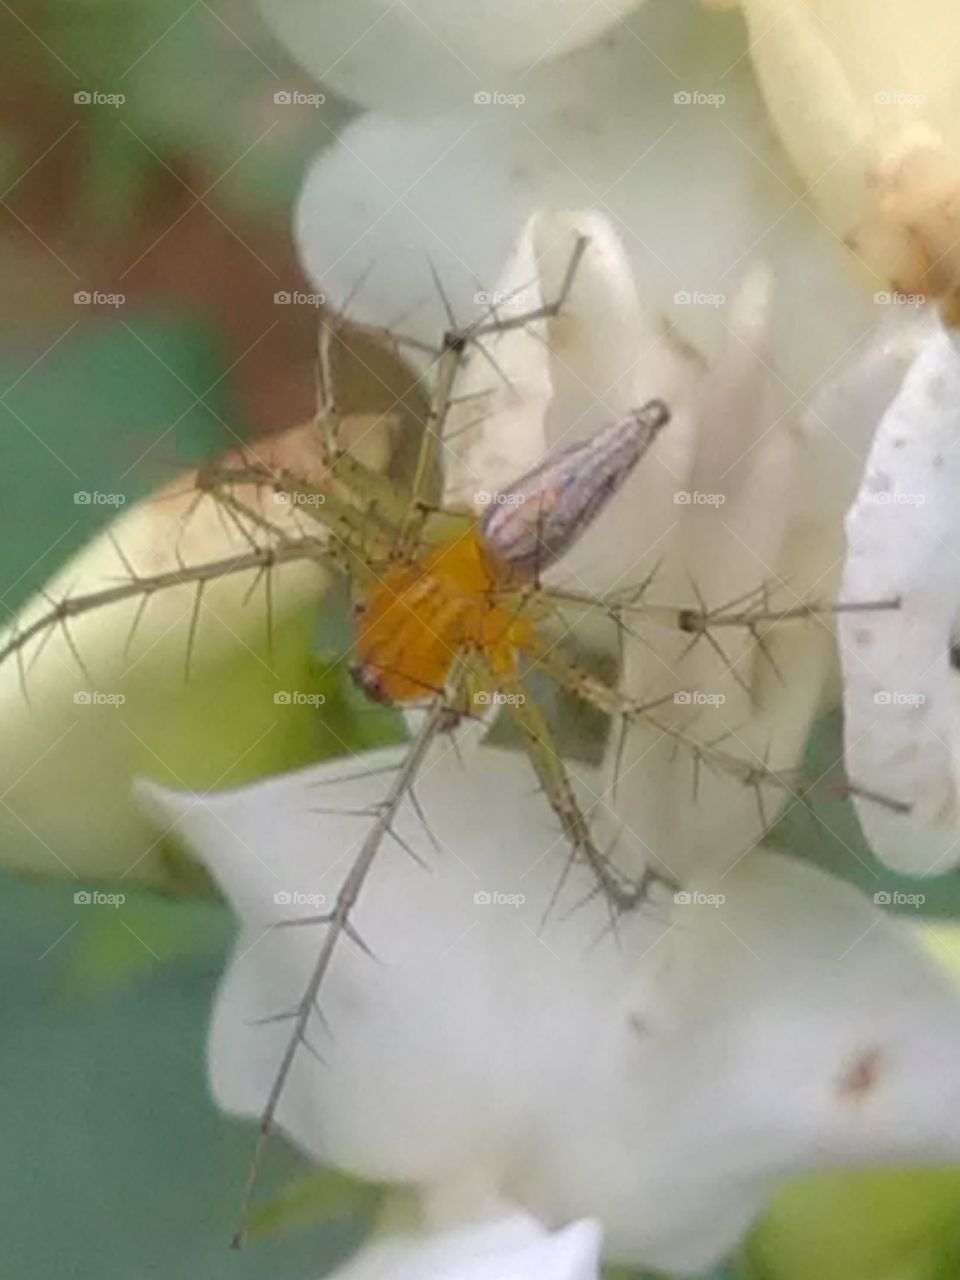 This is a very beautiful but very dangerous insect mosquitoes - spider.